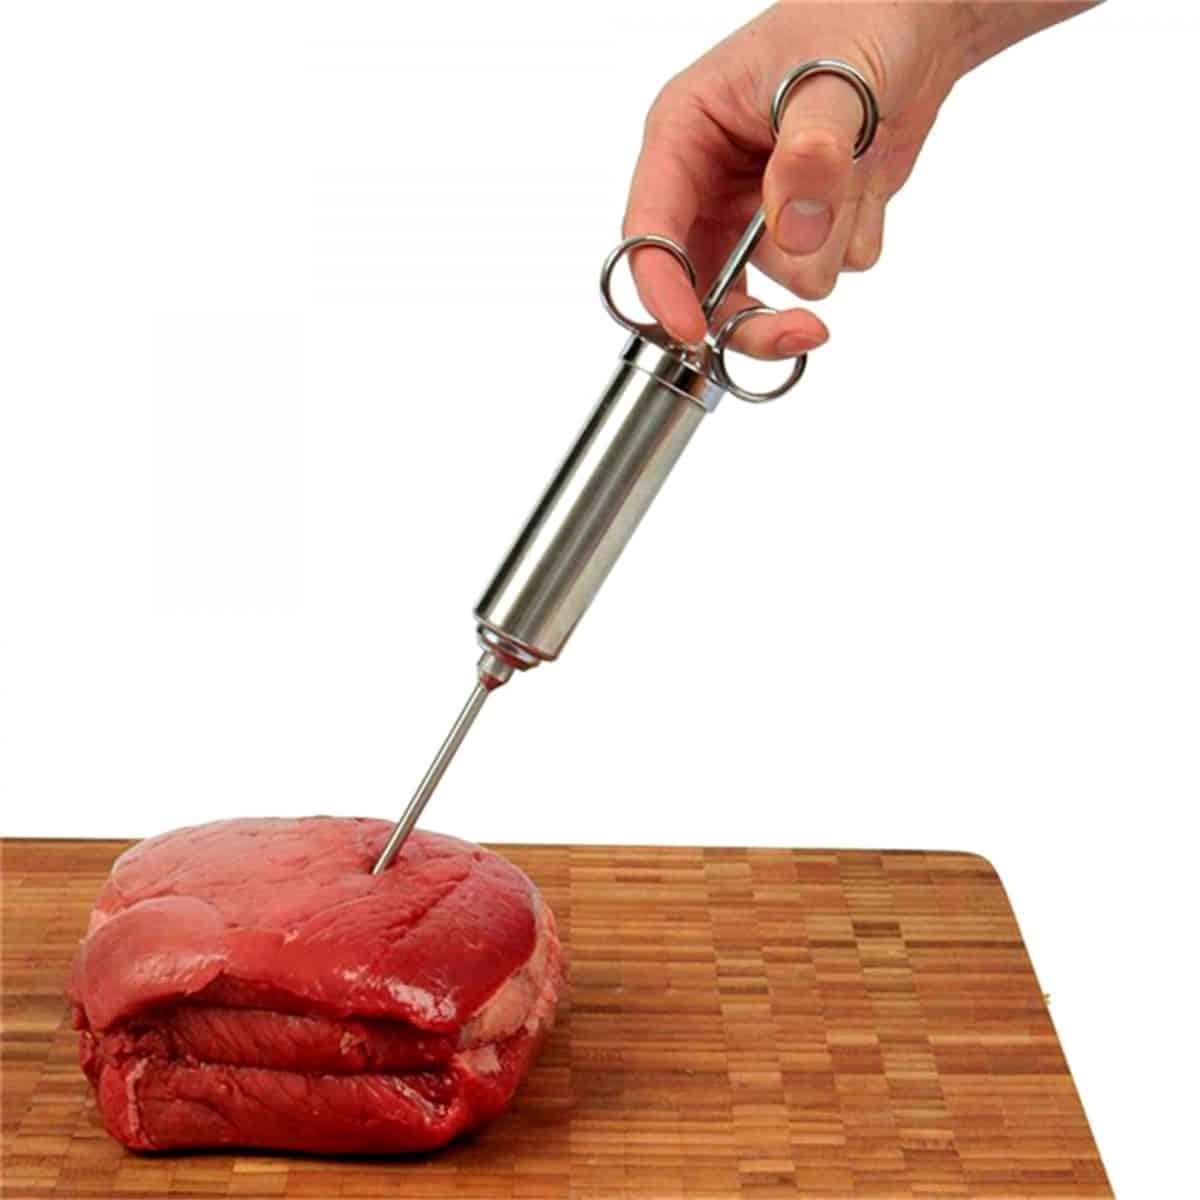 A hand injecting marinade into beef on a cutting board, isolated on wh.